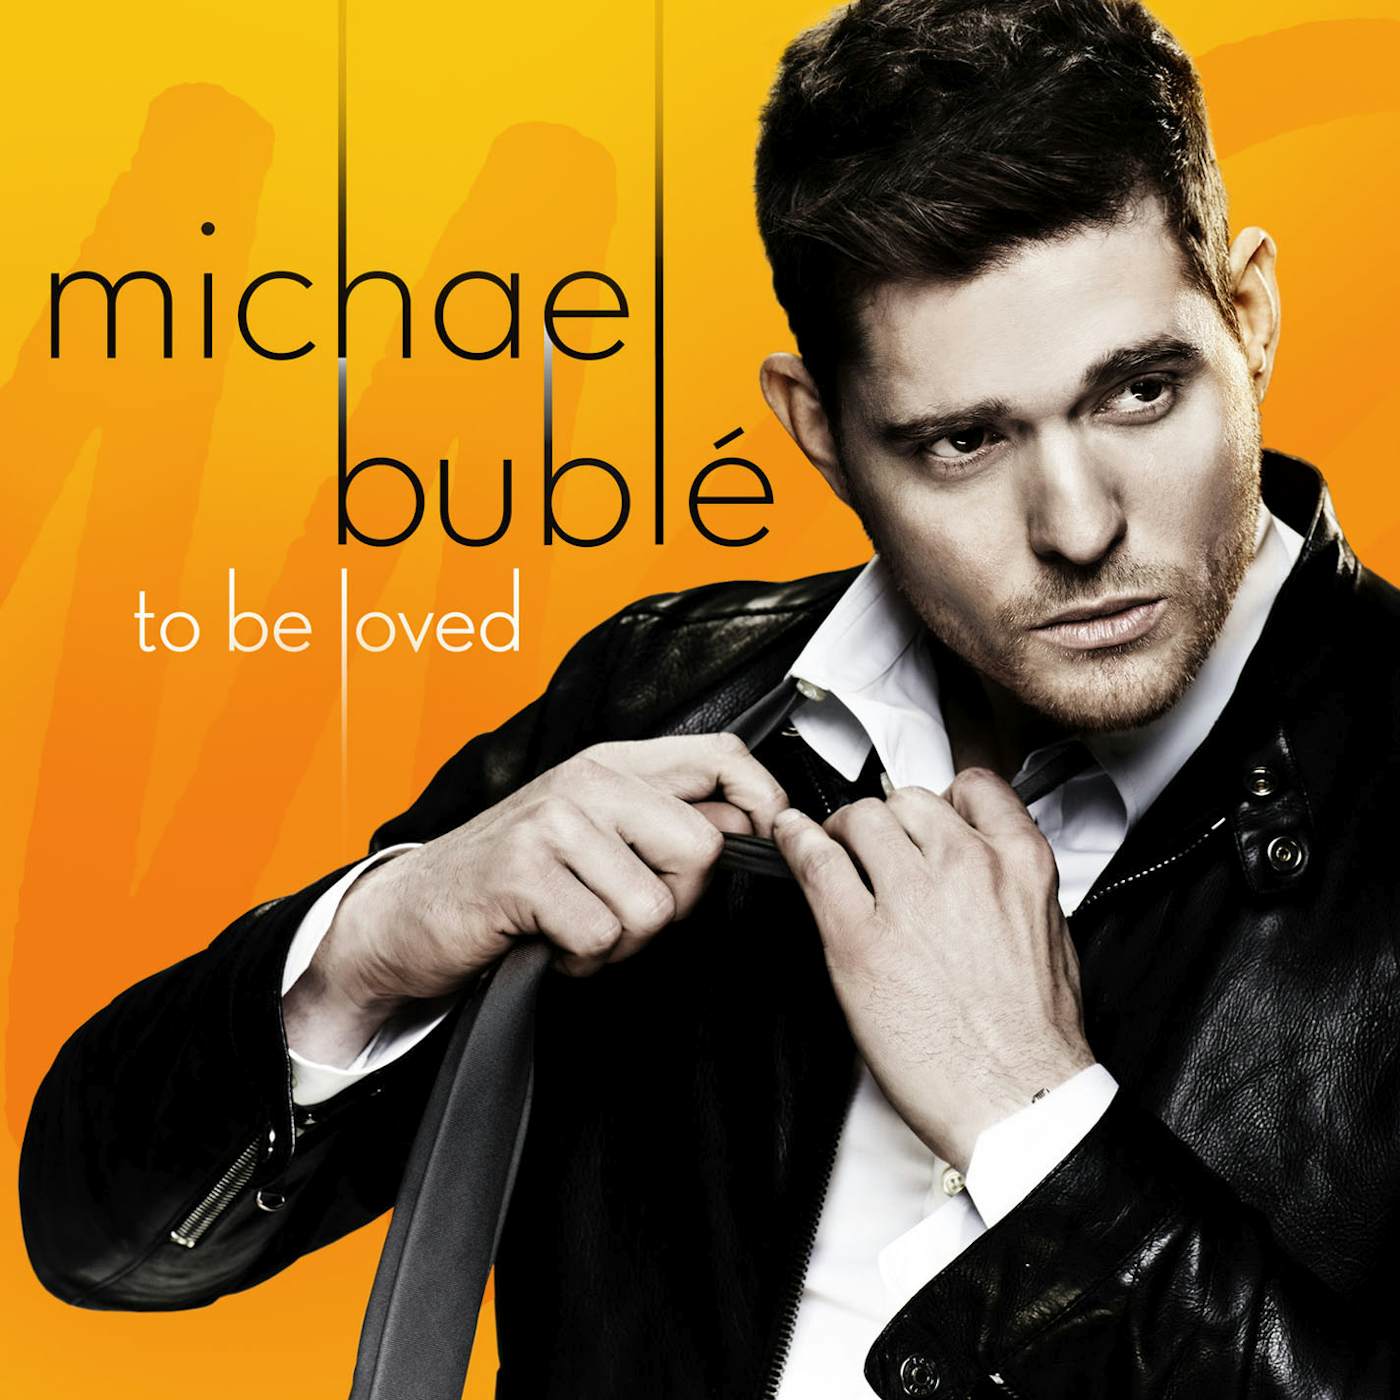 Michael Bublé TO BE LOVED CD